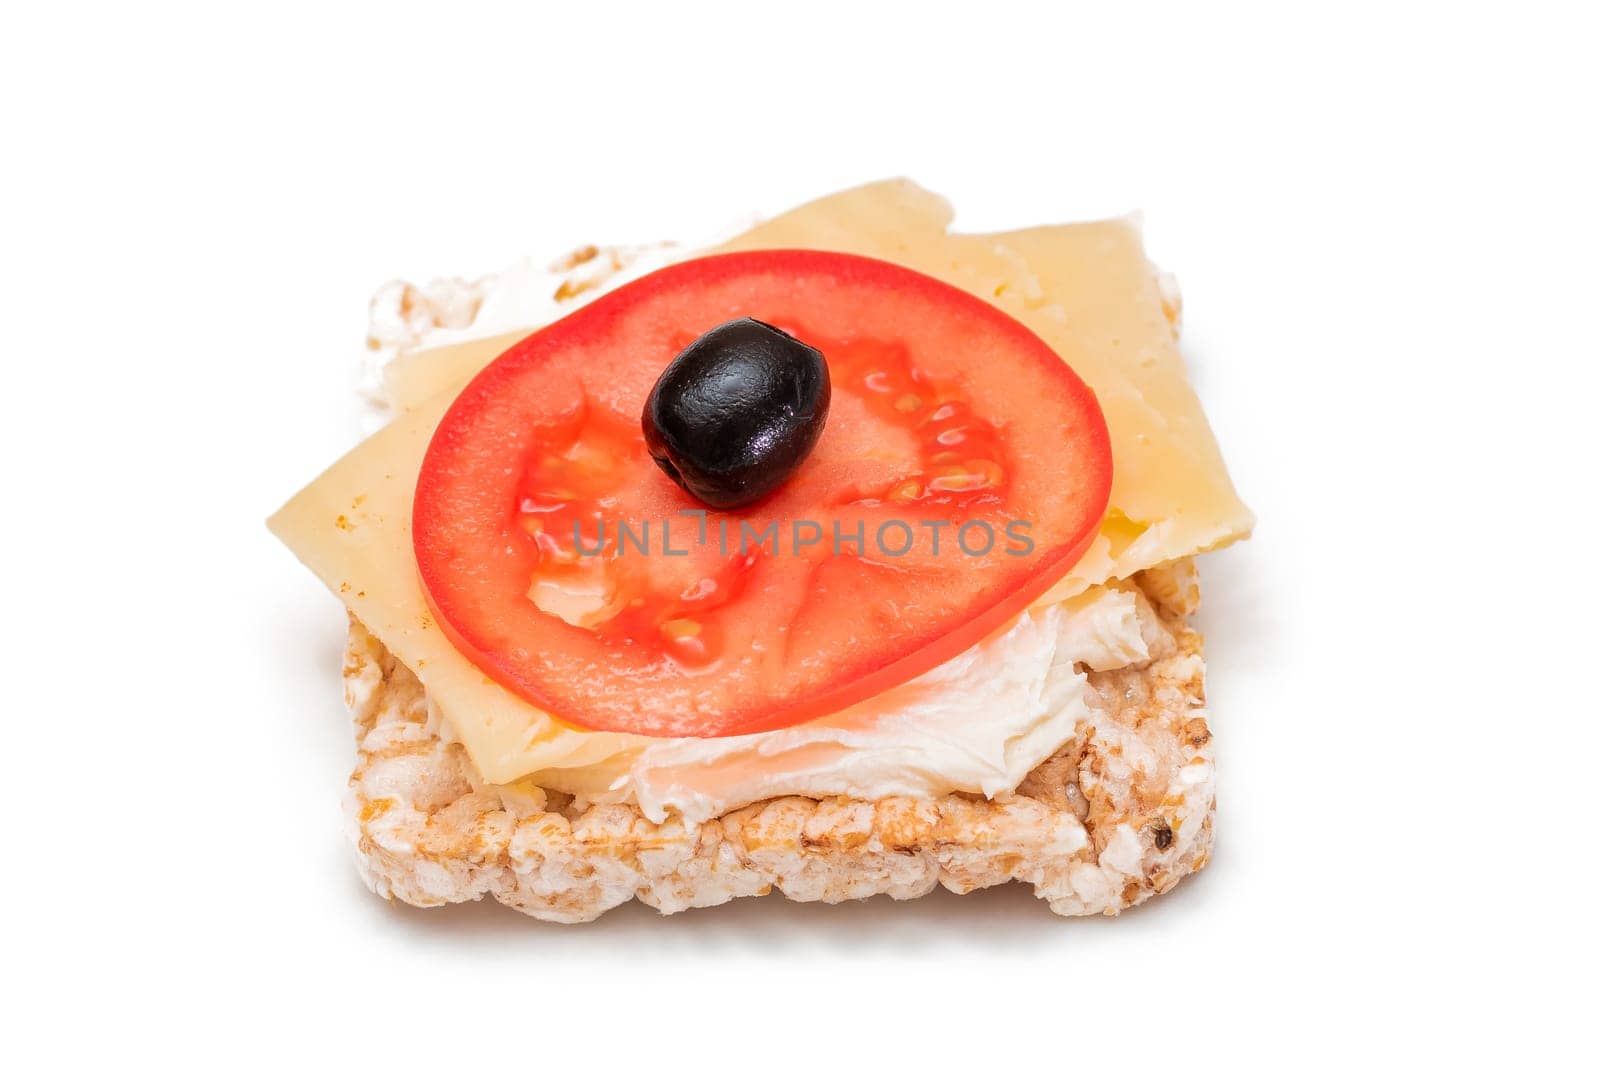 Rice Cake Sandwich with Tomato, Cheese and Olives - Isolated on White. Easy Breakfast. Diet Food. Quick and Healthy Sandwiches. Crispbread with Tasty Filling. Healthy Dietary Snack - Isolation